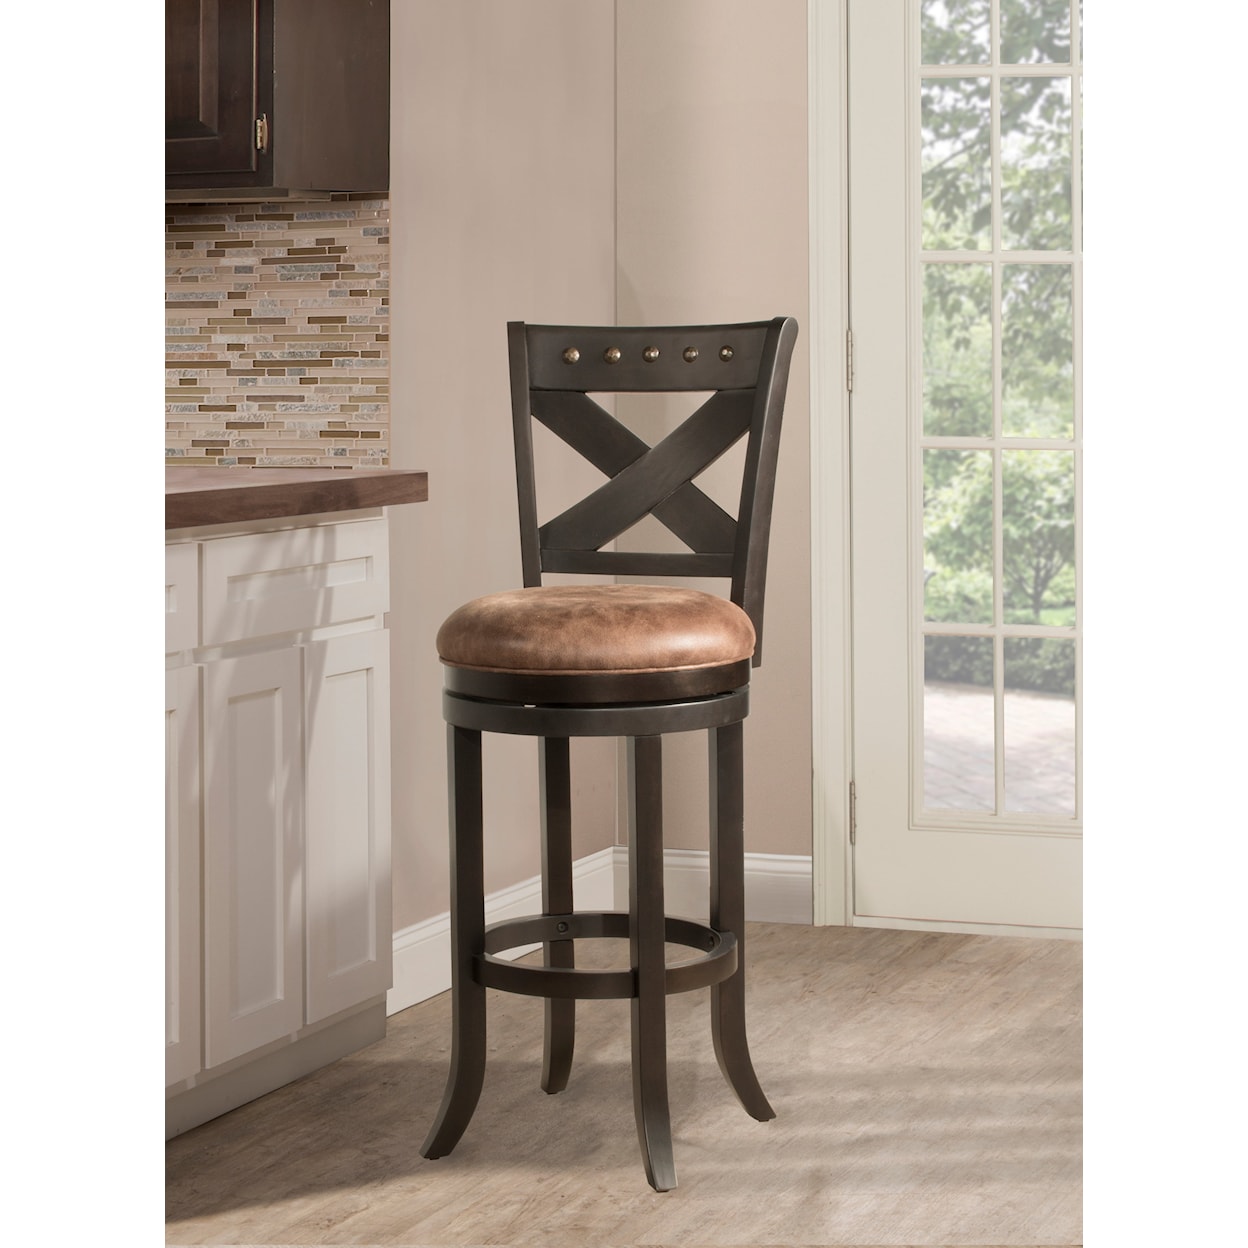 Hillsdale Brantley Counter Stool